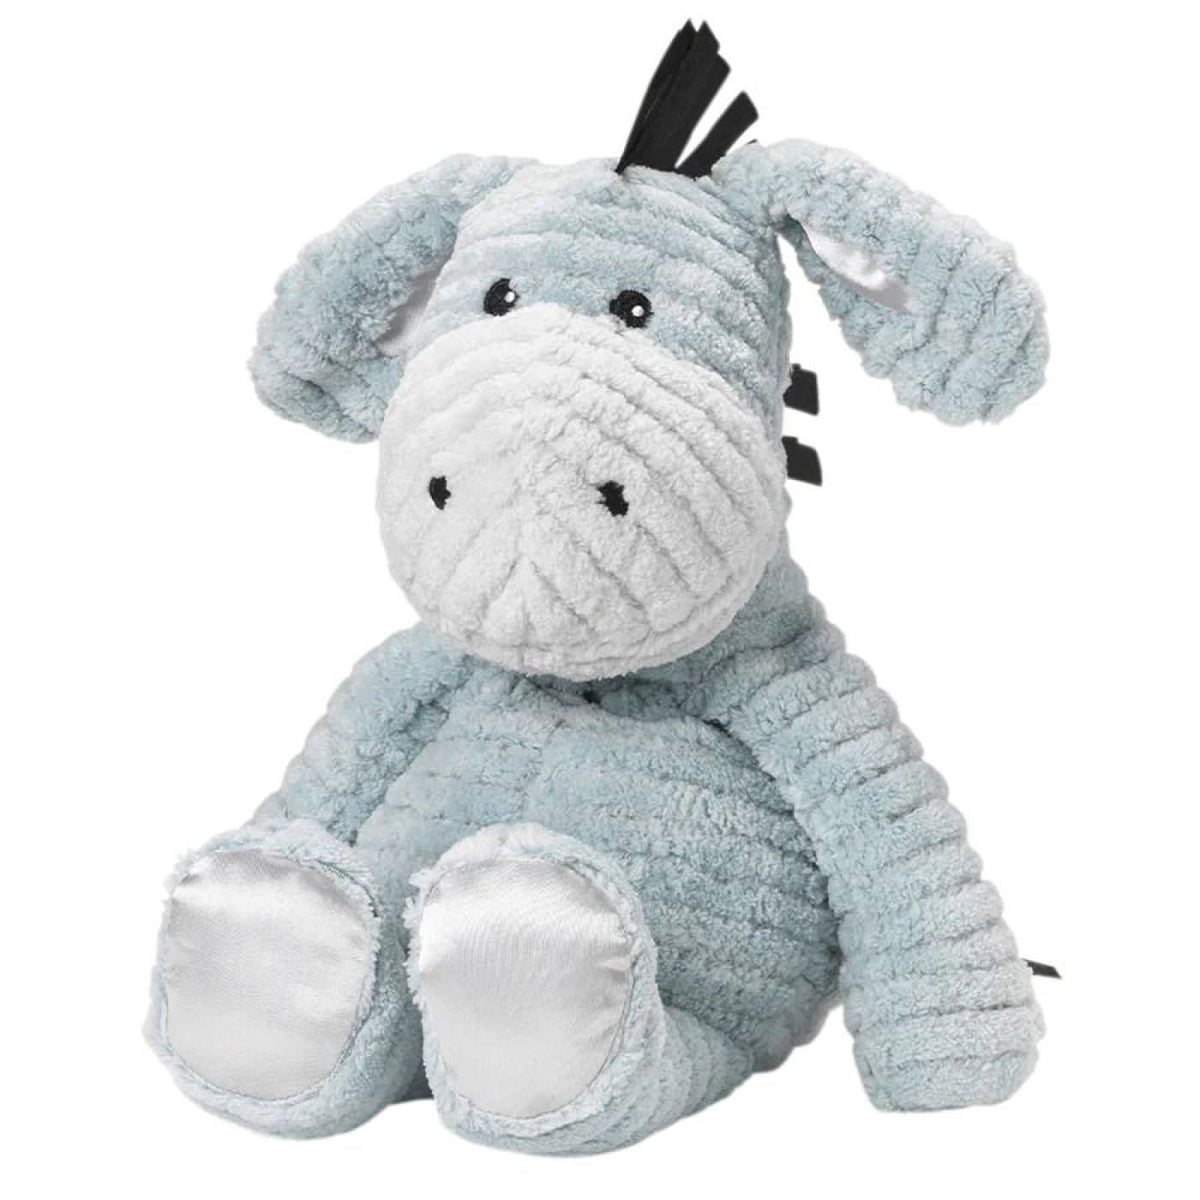 Warmies My First Heatable Soft Toy Scented with French Lavender - Donkey - Donkey - HEALTH &amp; HOME SAFETY - THERMOMETERS/MEDICINAL